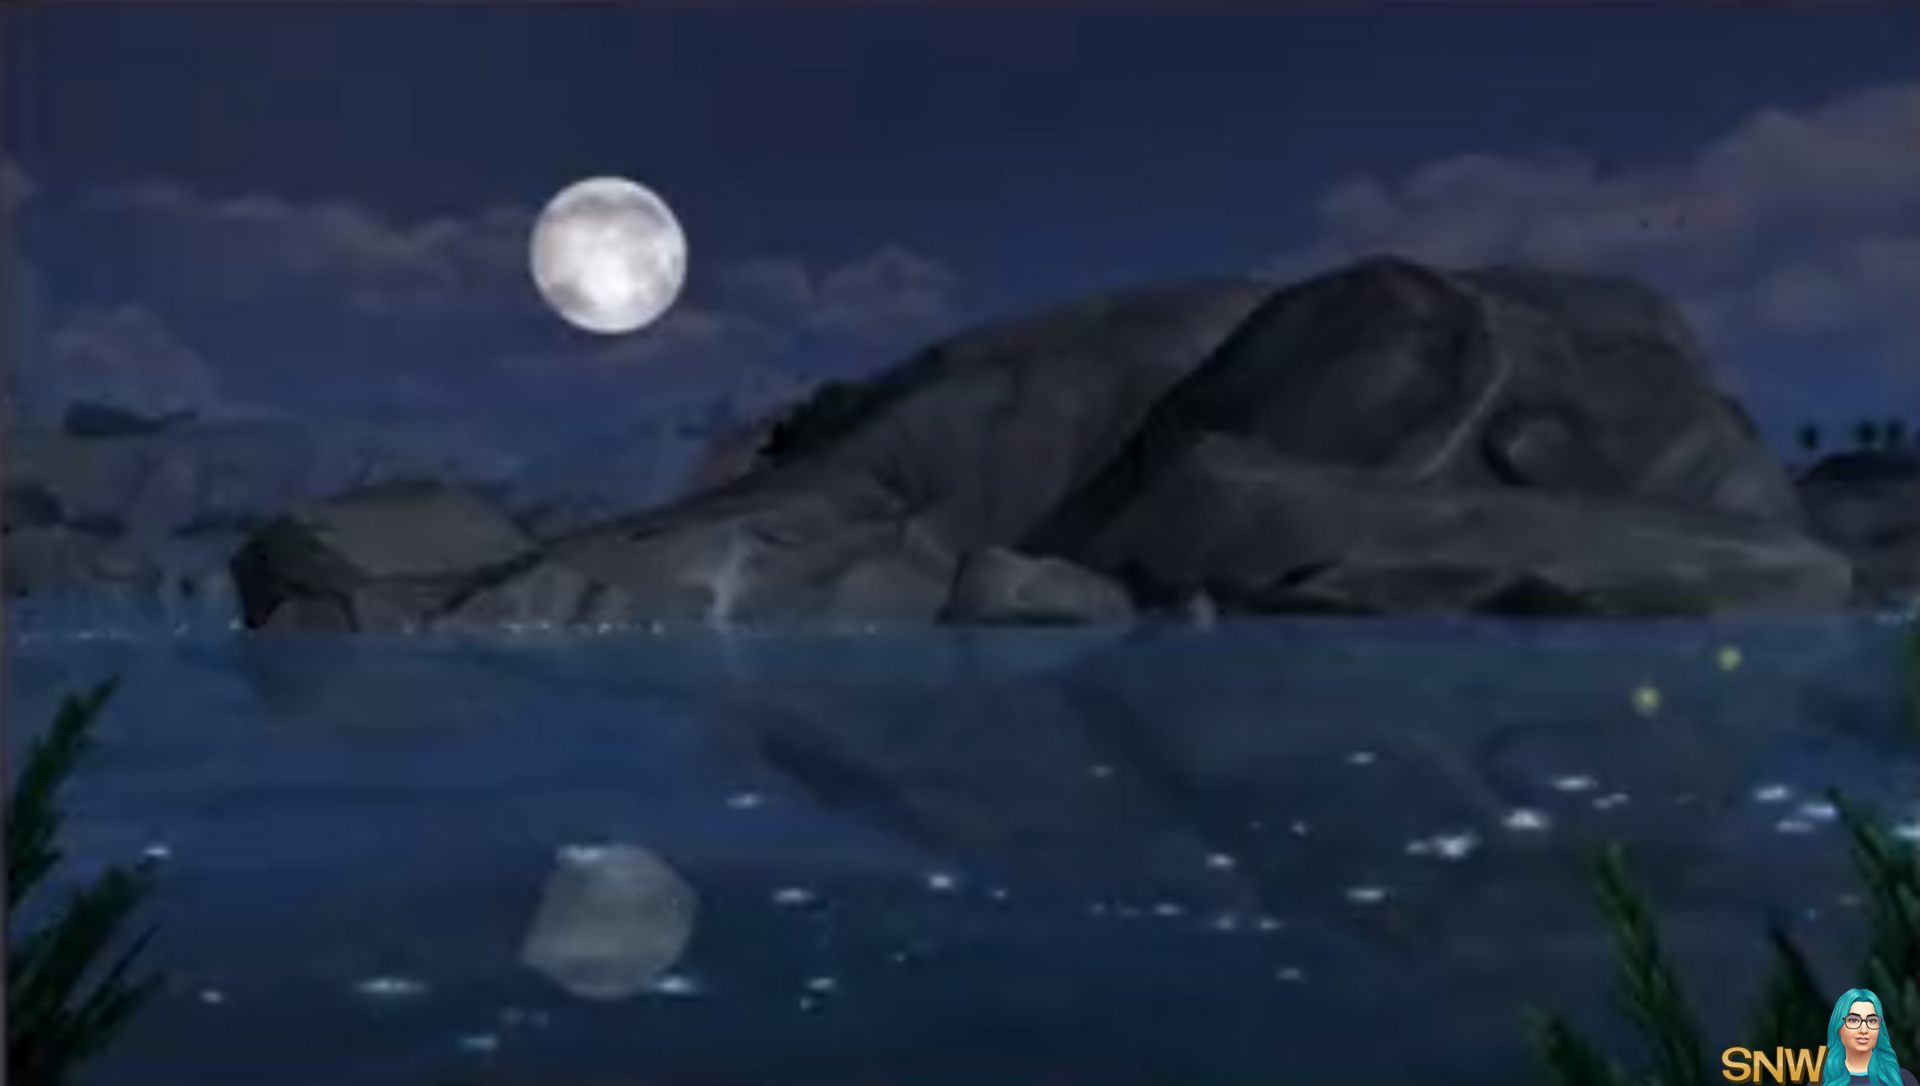 STAY UP in The Sims - Moonlight landscape with howling in the background